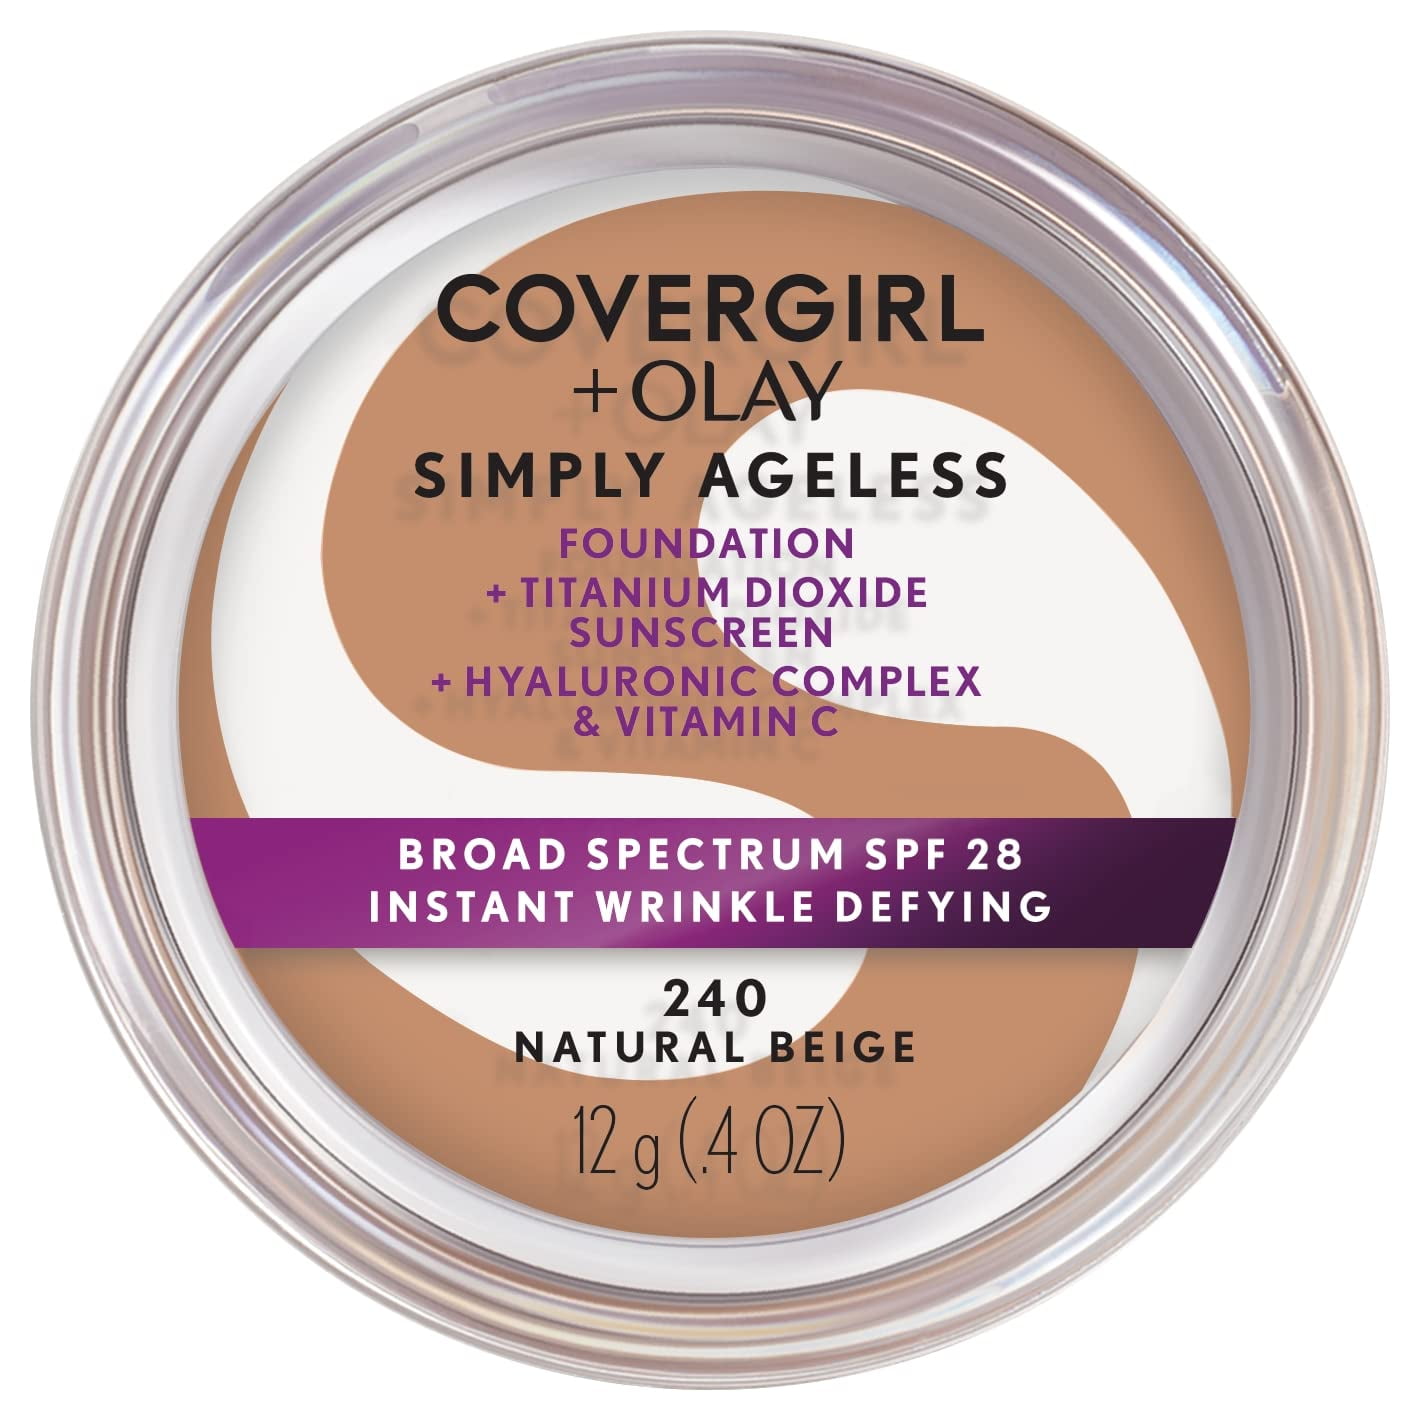 COVERGIRL OLAY Simply Ageless Instant Wrinkle Defying Foundation with SPF 28 Natural Beige 0 44 oz 63173433 3342 4875 a9ce c4d733ca0fa8.4912d64b619d074d85478a6f63aa44e5